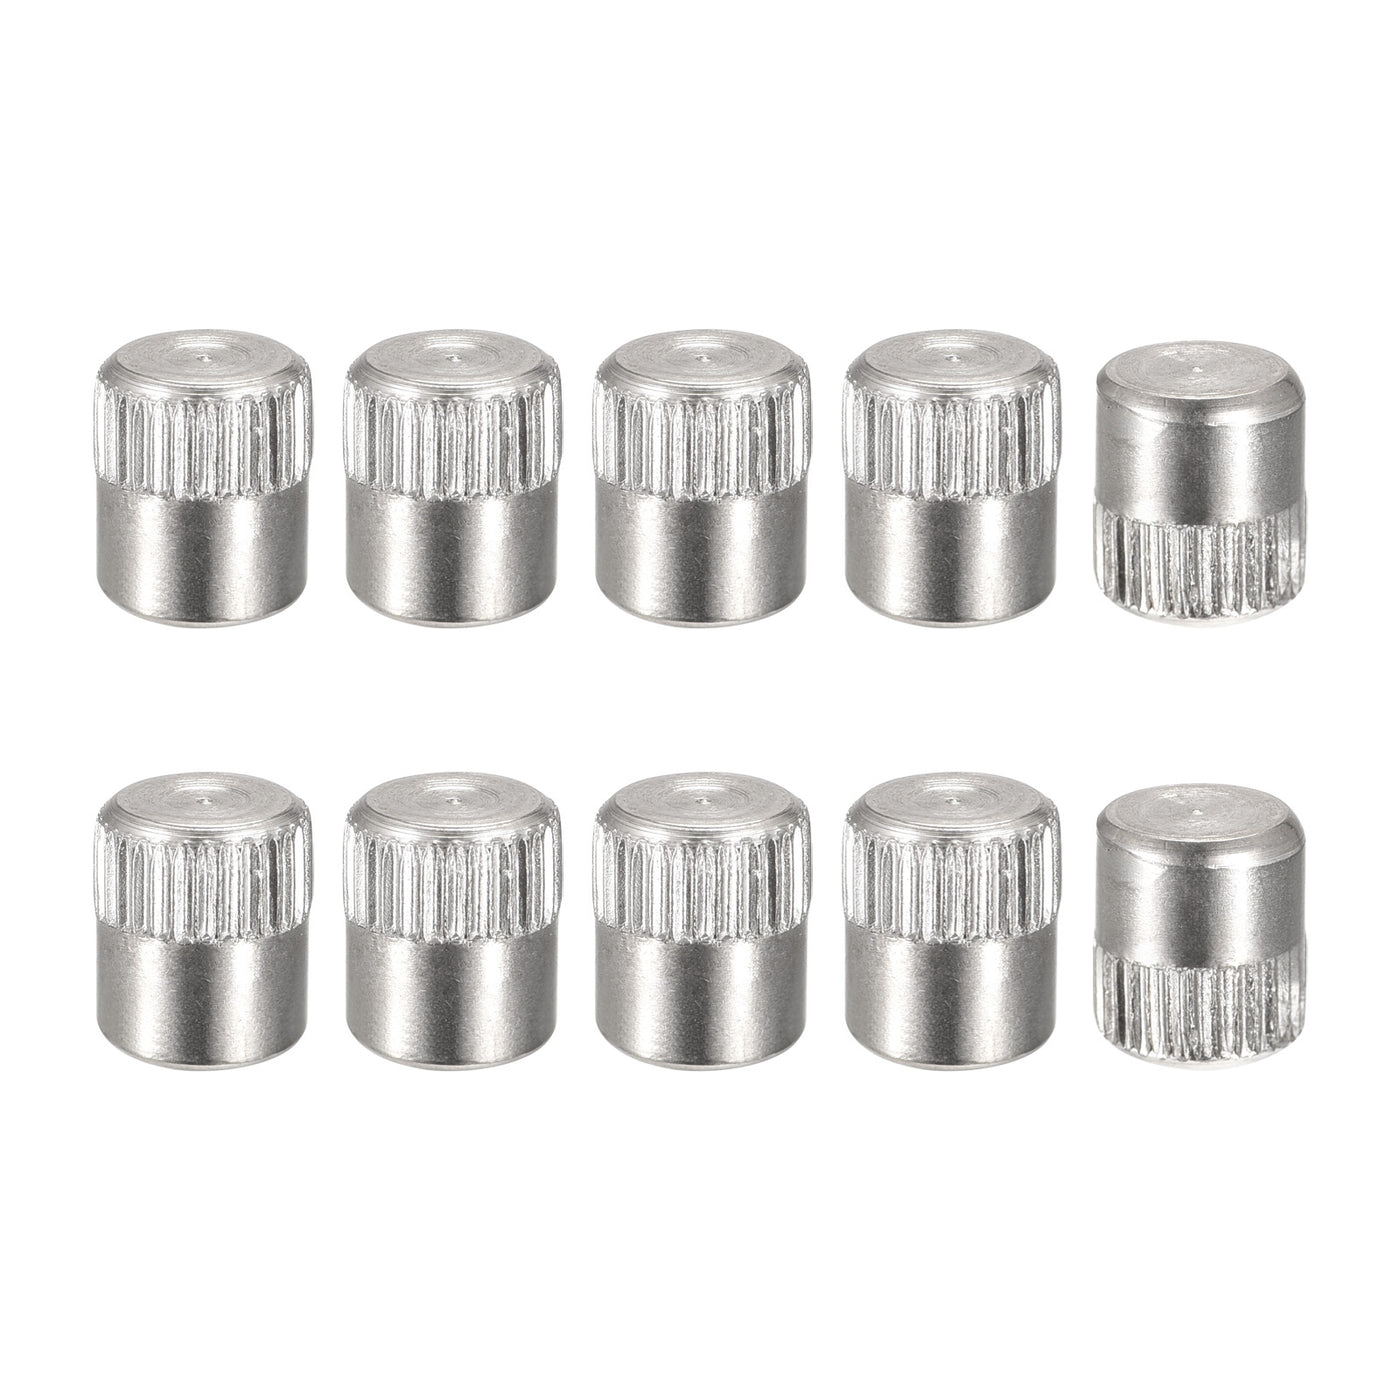 uxcell Uxcell 8x10mm 304 Stainless Steel Dowel Pins, 10Pcs Knurled Head Flat End Dowel Pin